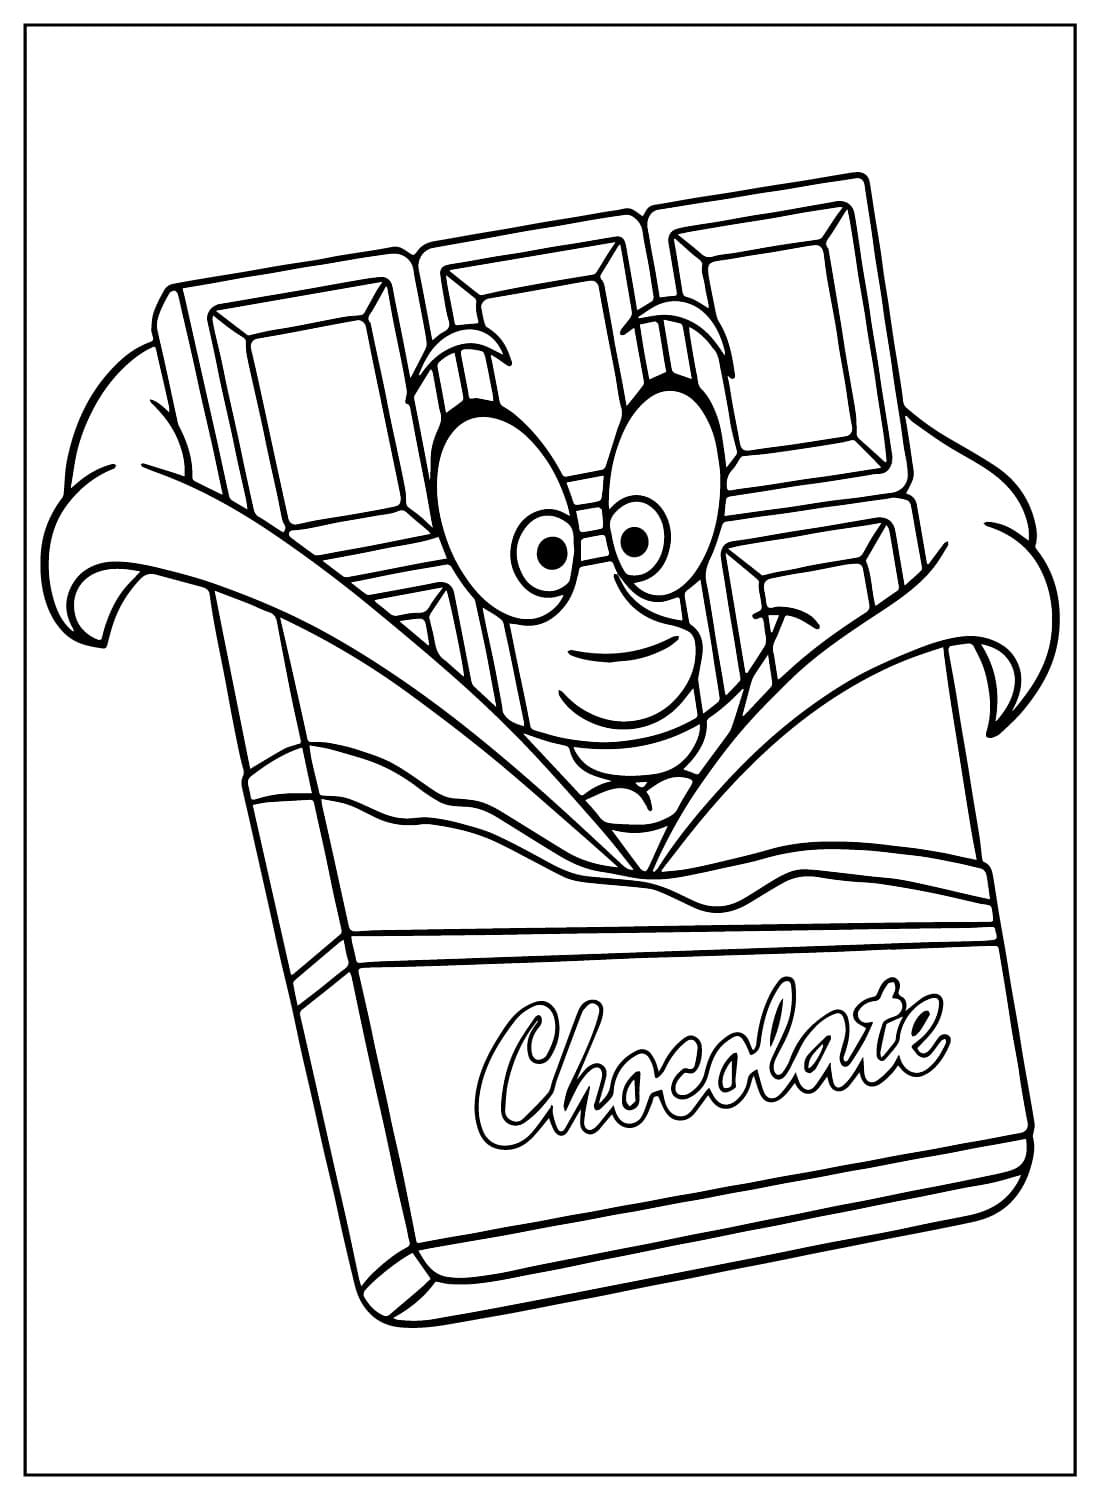 Images Chocolate Coloring Page from Chocolate